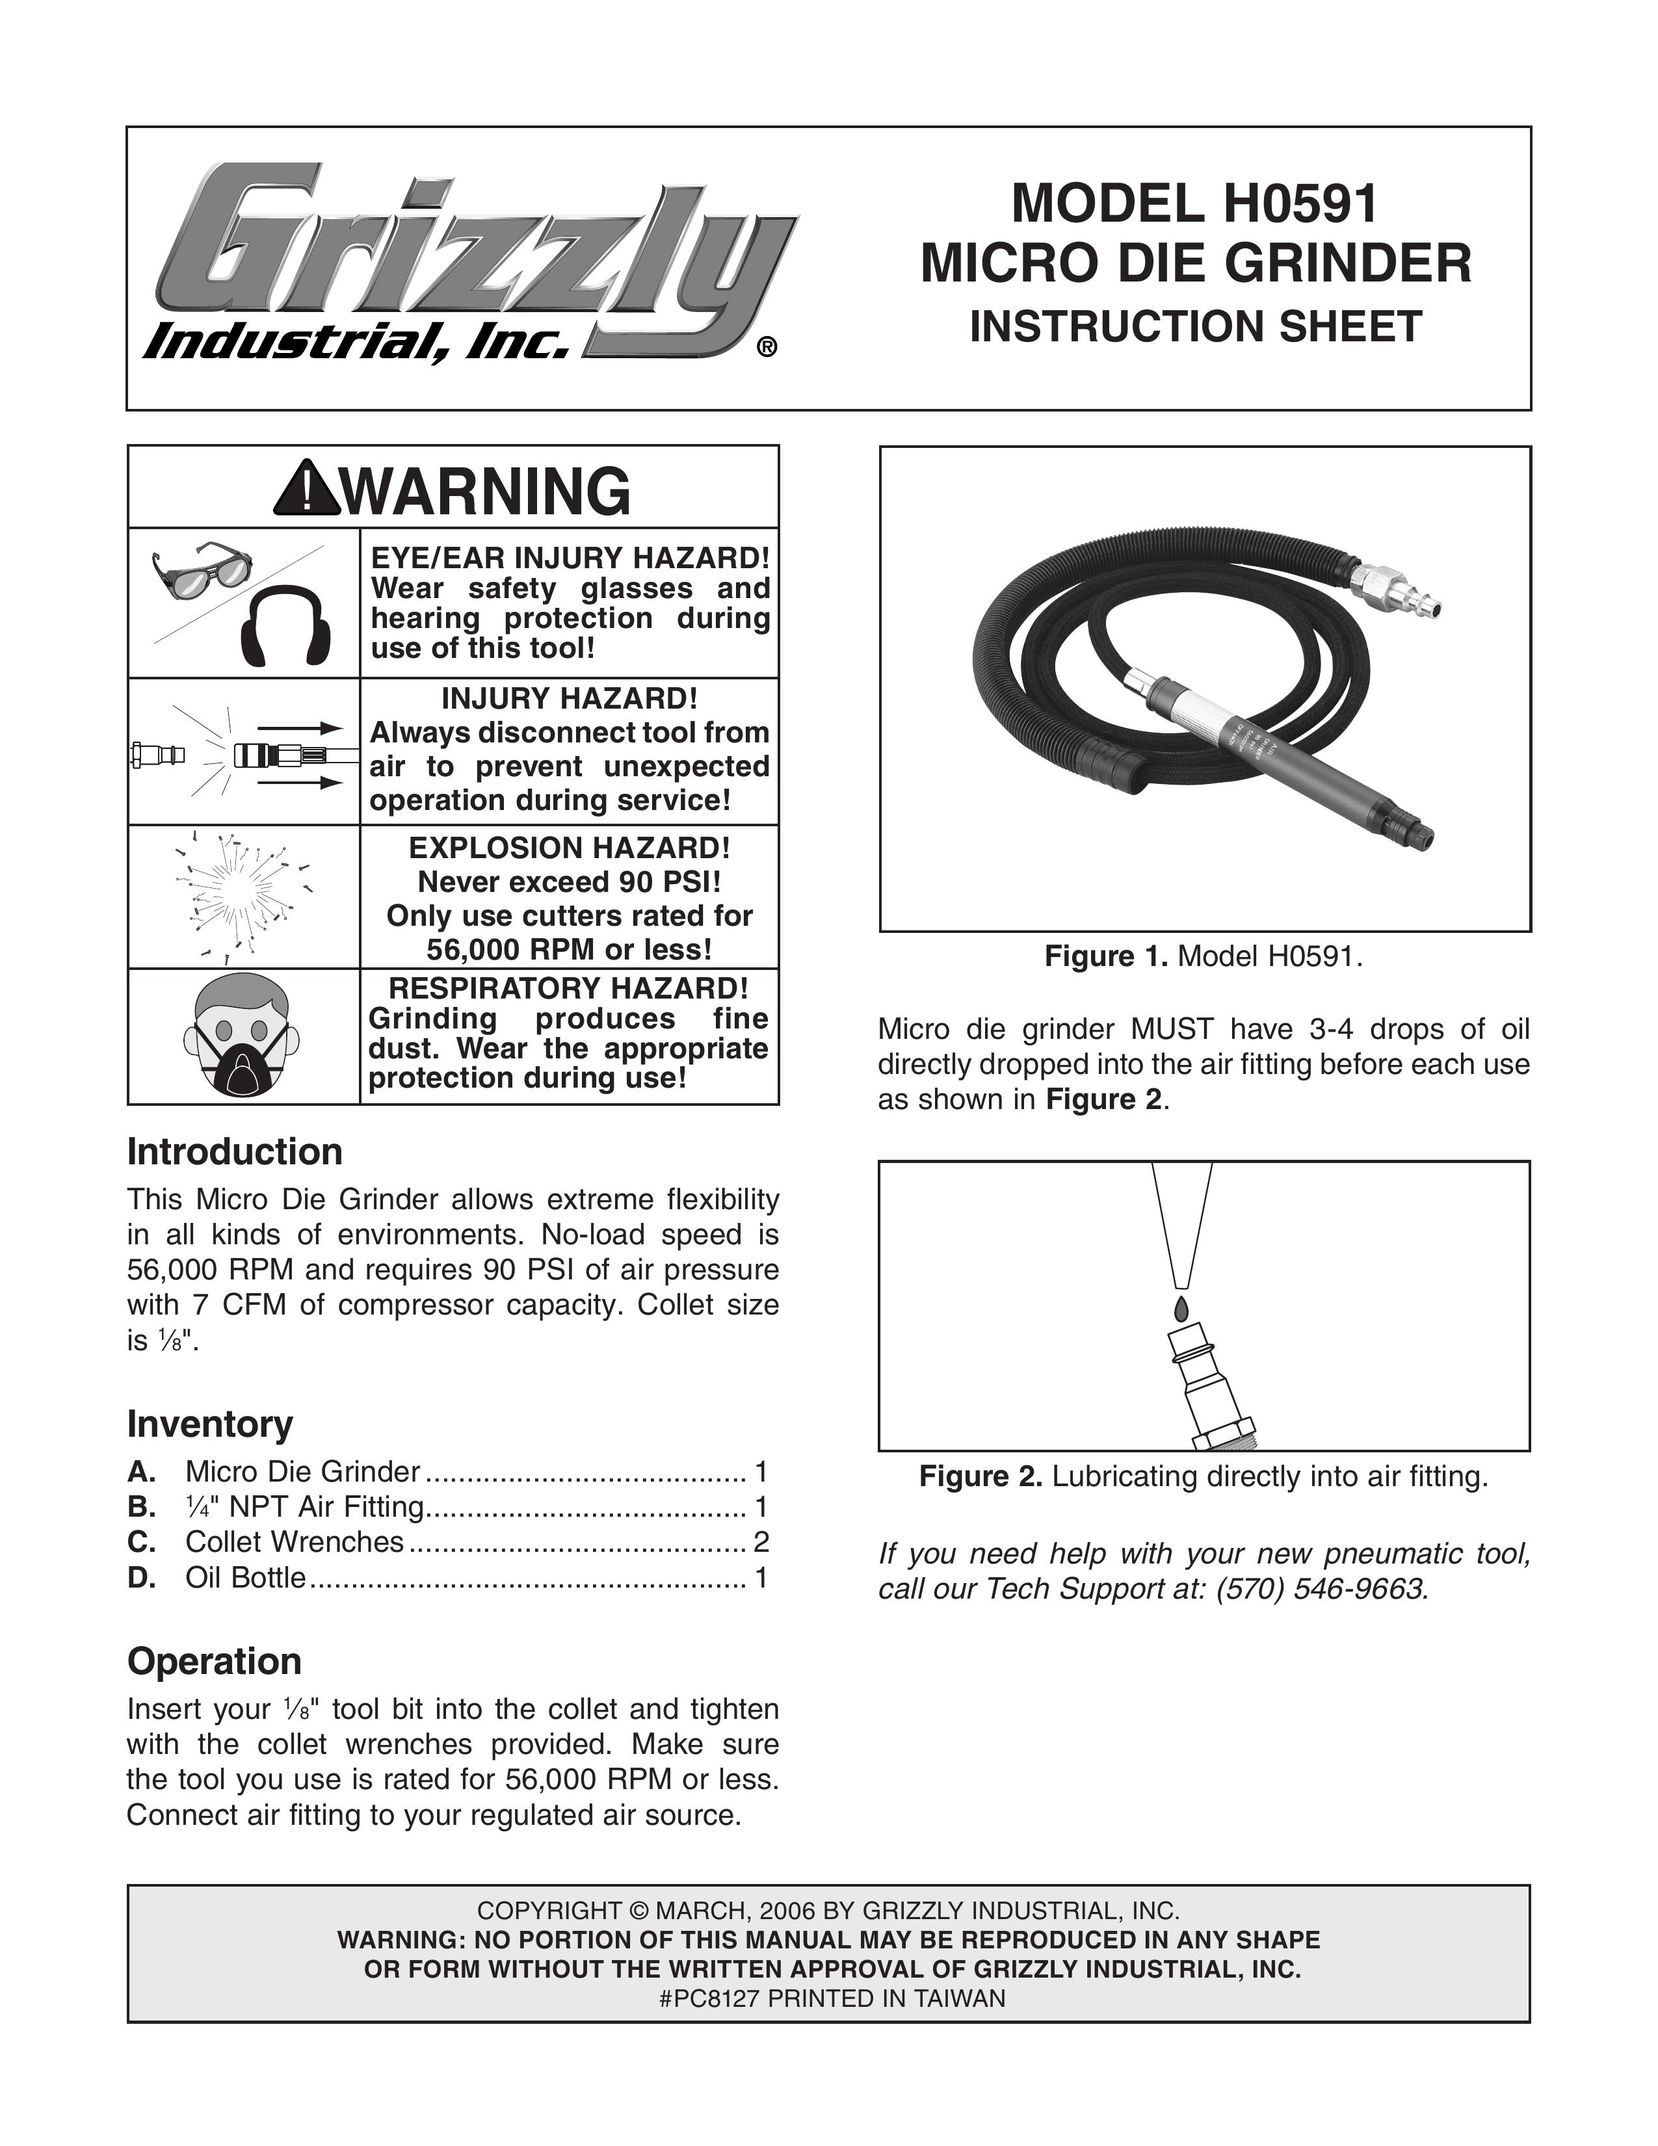 Grizzly H0591 Grinder User Manual